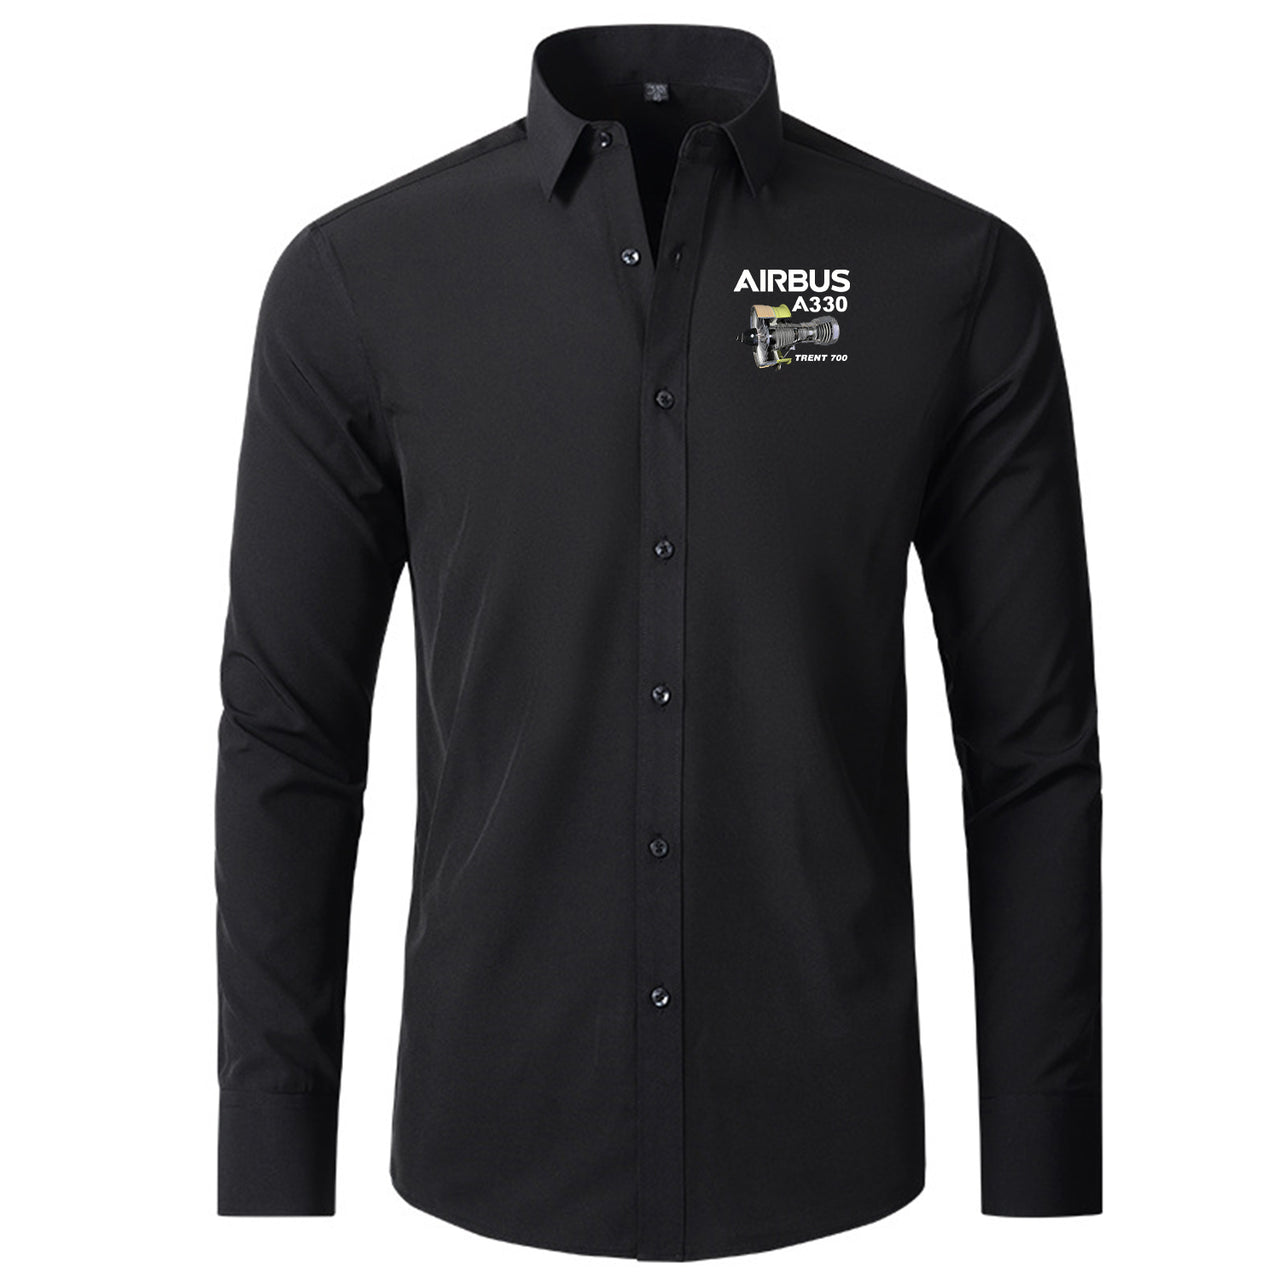 Airbus A330 & Trent 700 Engine Designed Long Sleeve Shirts